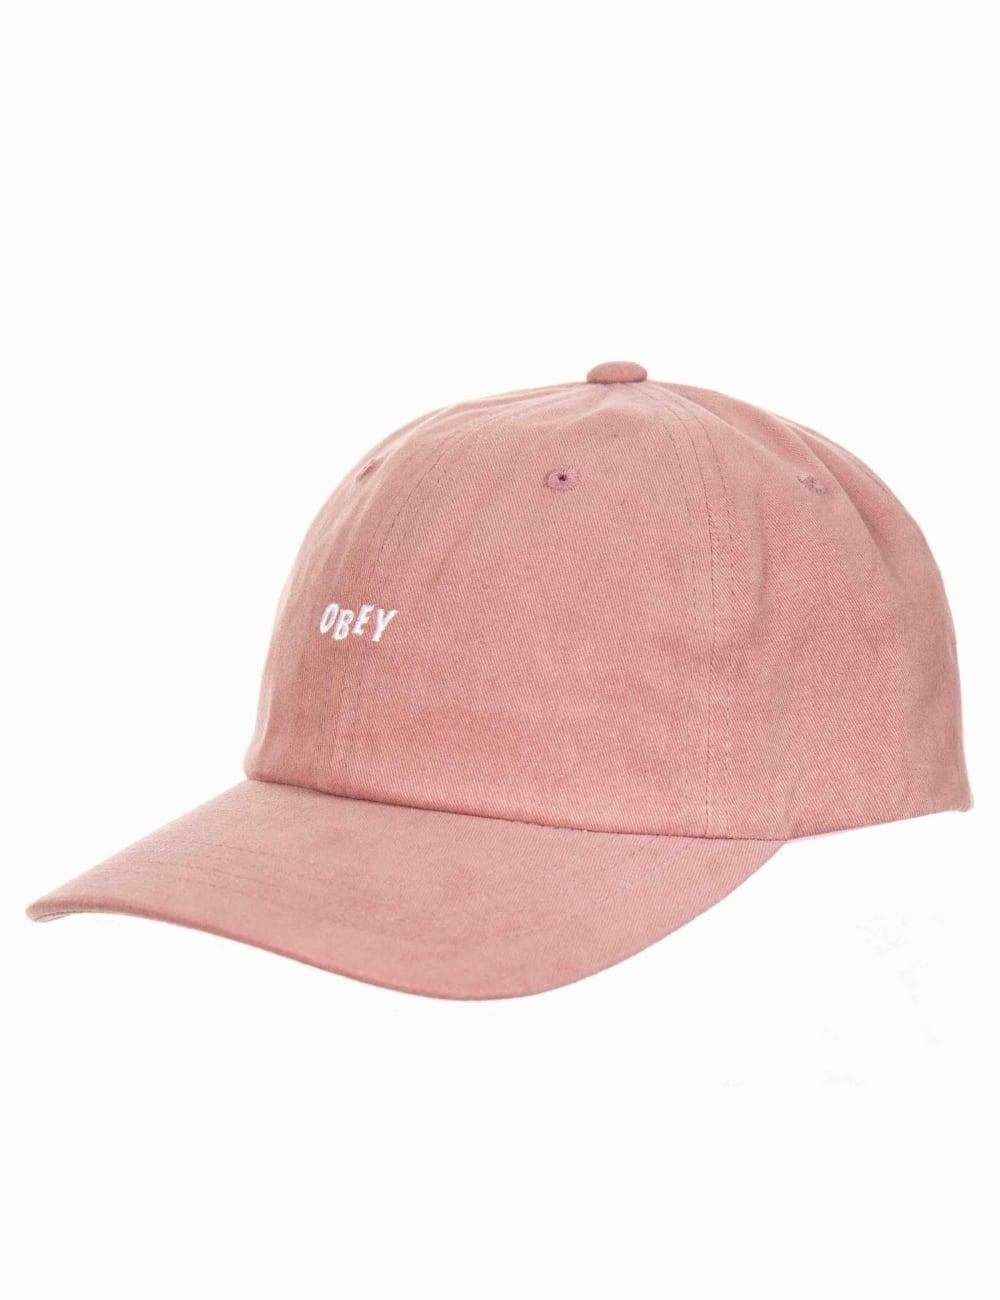 OBEY Clothing Rose Logo - Obey Clothing Jumble Bar III 6 Panel Hat - Rose - Accessories from ...